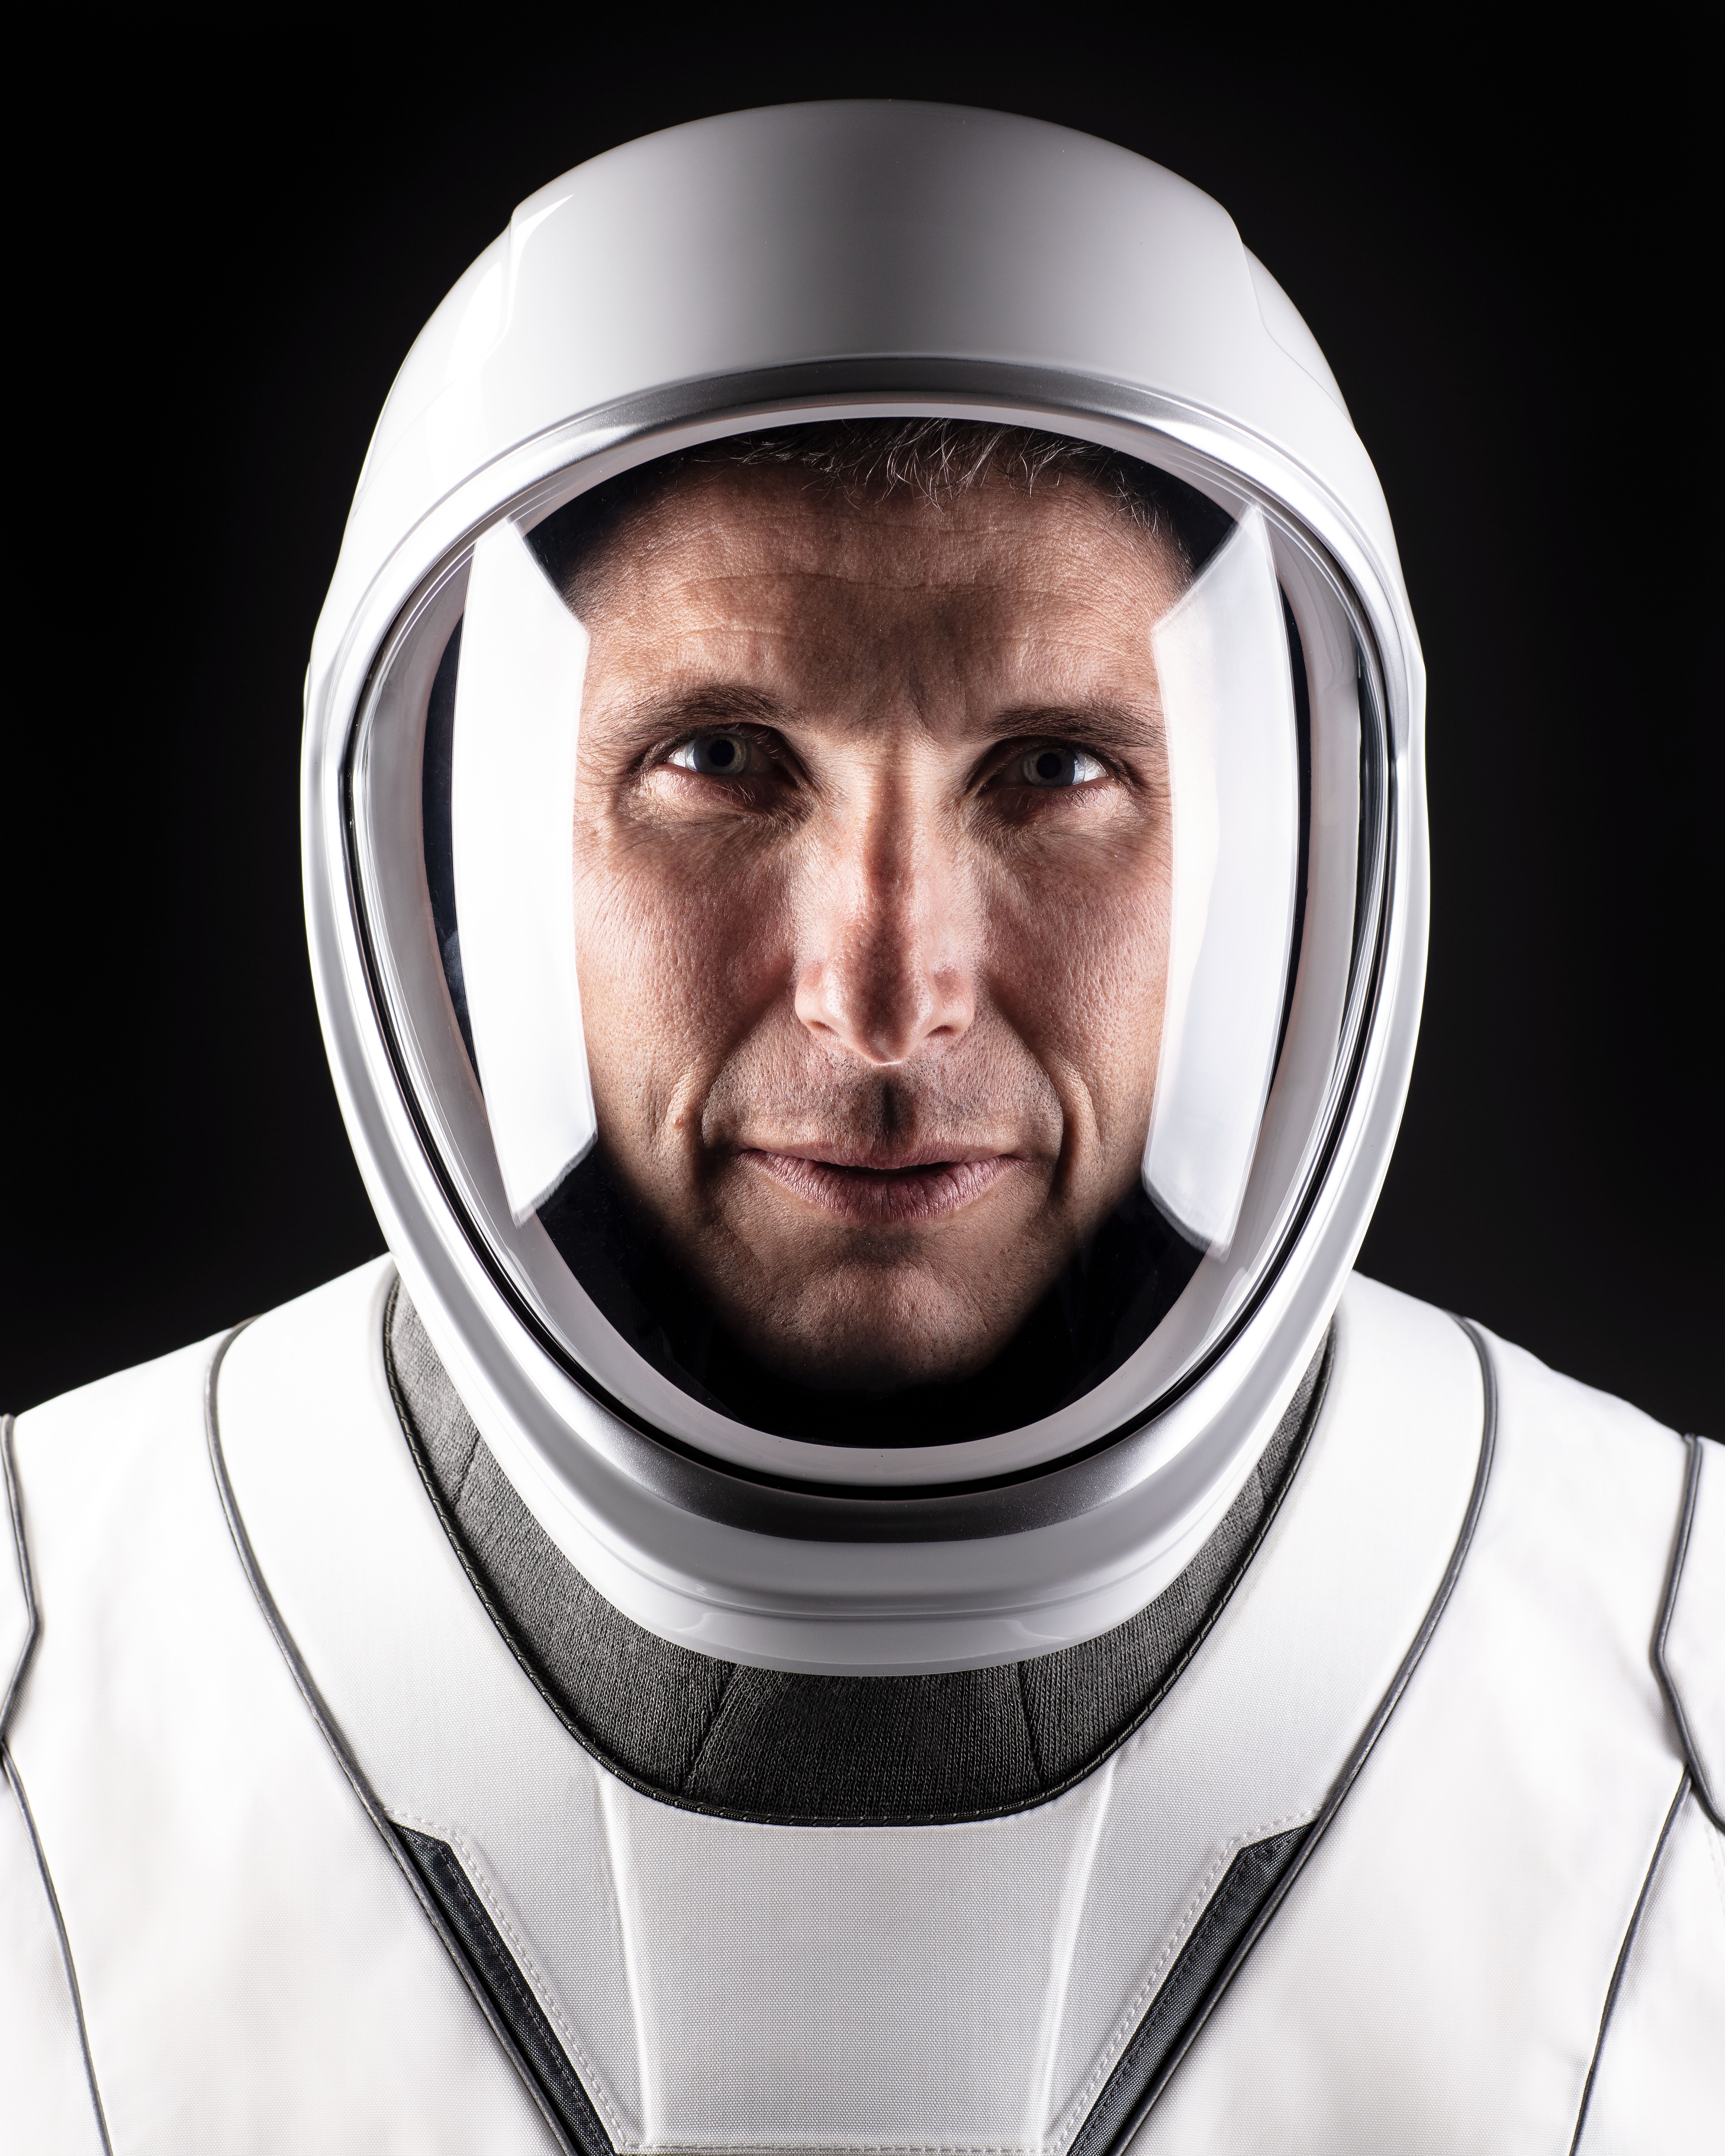 A portrait photo of NASA's SpaceX Crew-1 Spacecraft Commander Mike Hopkins in his SpaceX spacesuit.